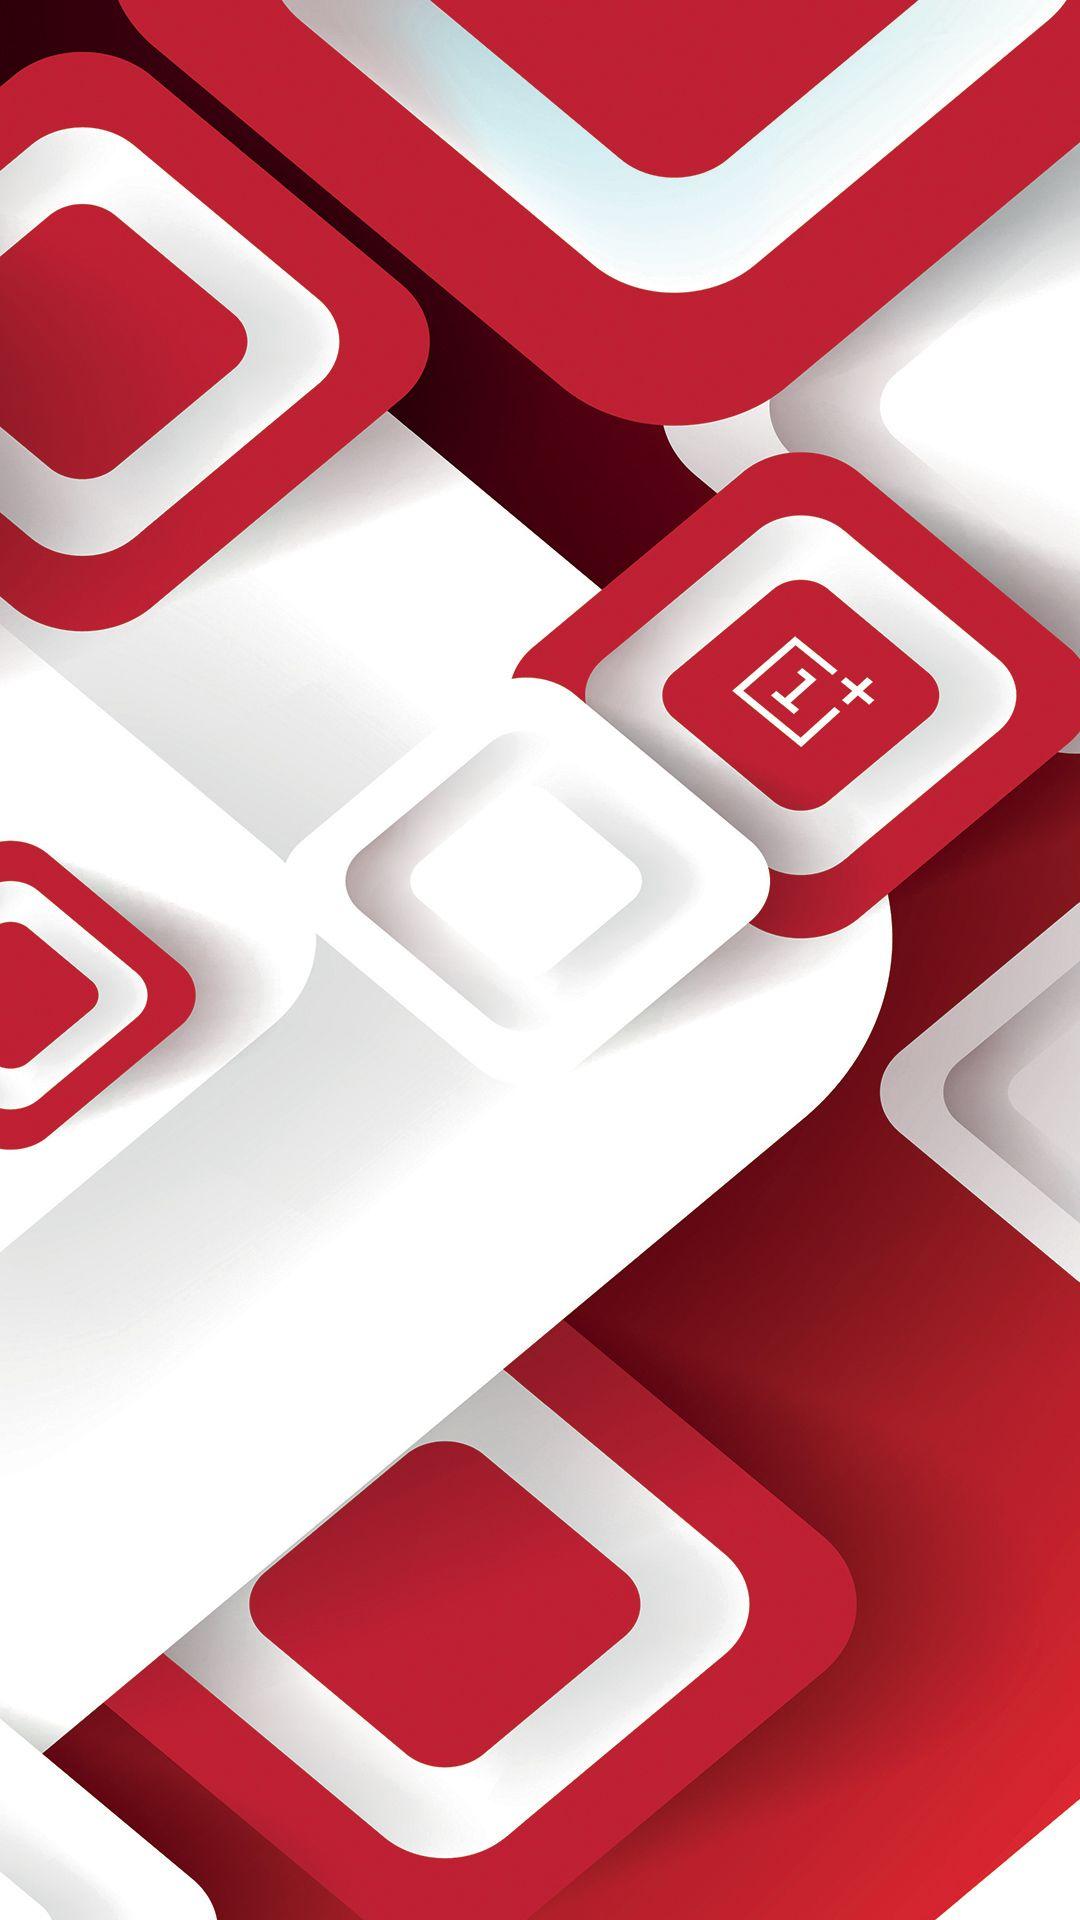 OnePlus One Wallpapers on Behance